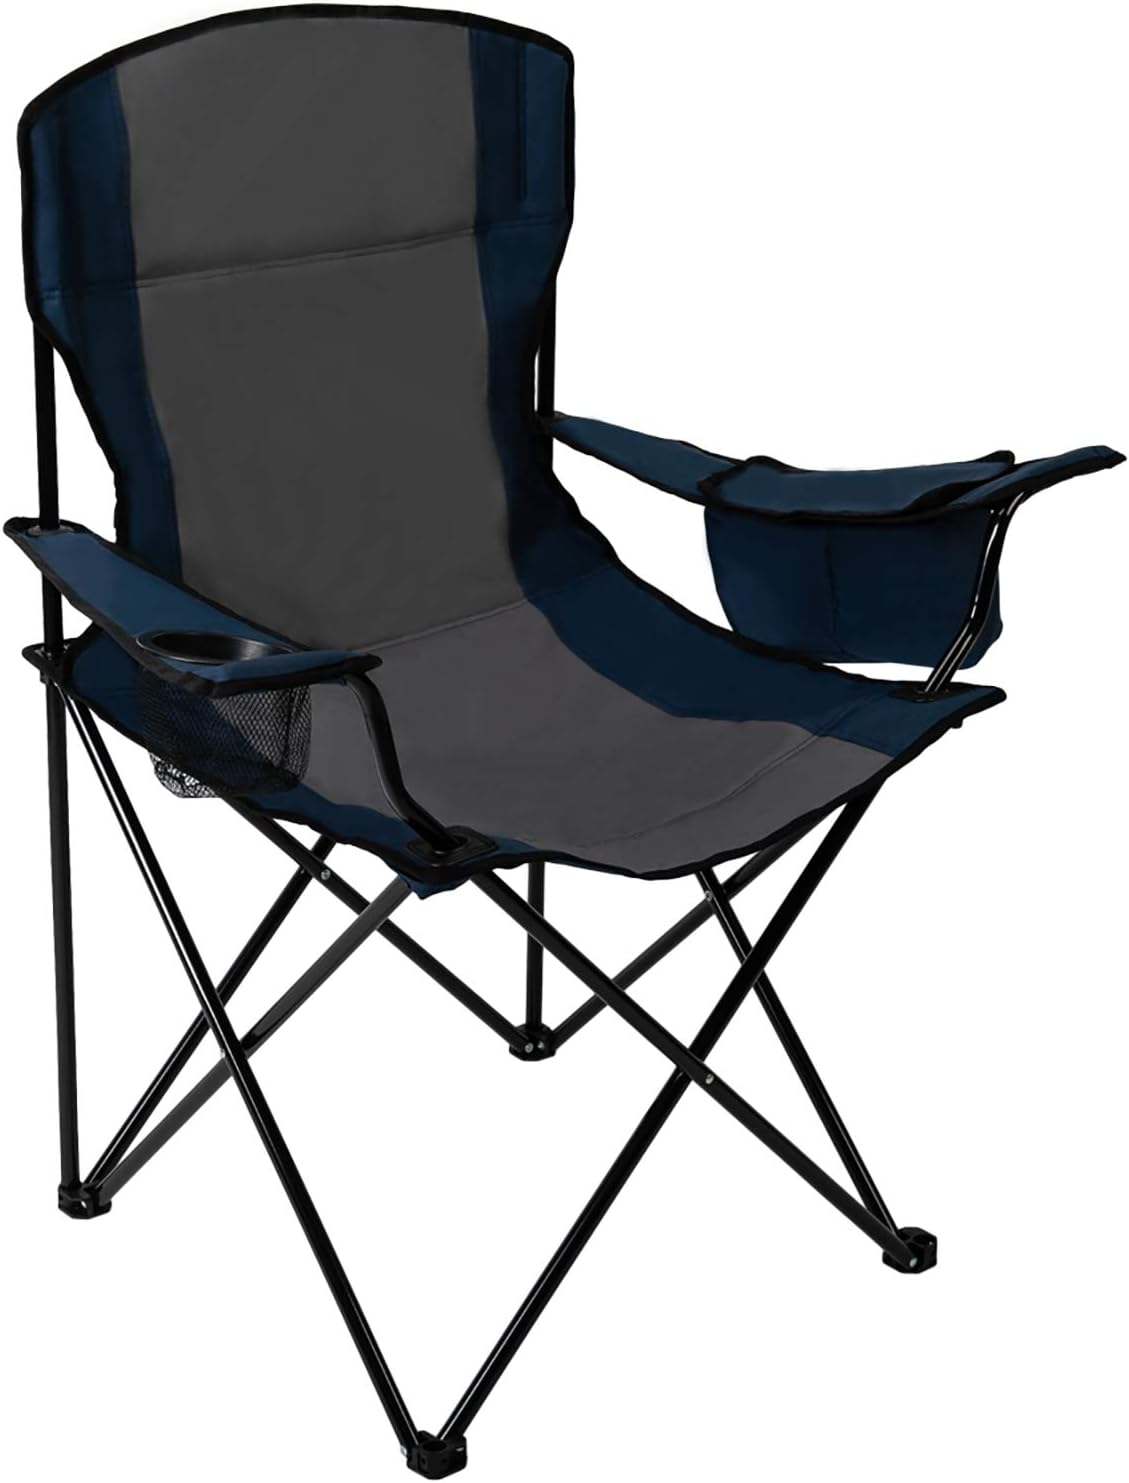 Pacific Pass Quad Camp Chair w/ Built-In Cooler and [...]